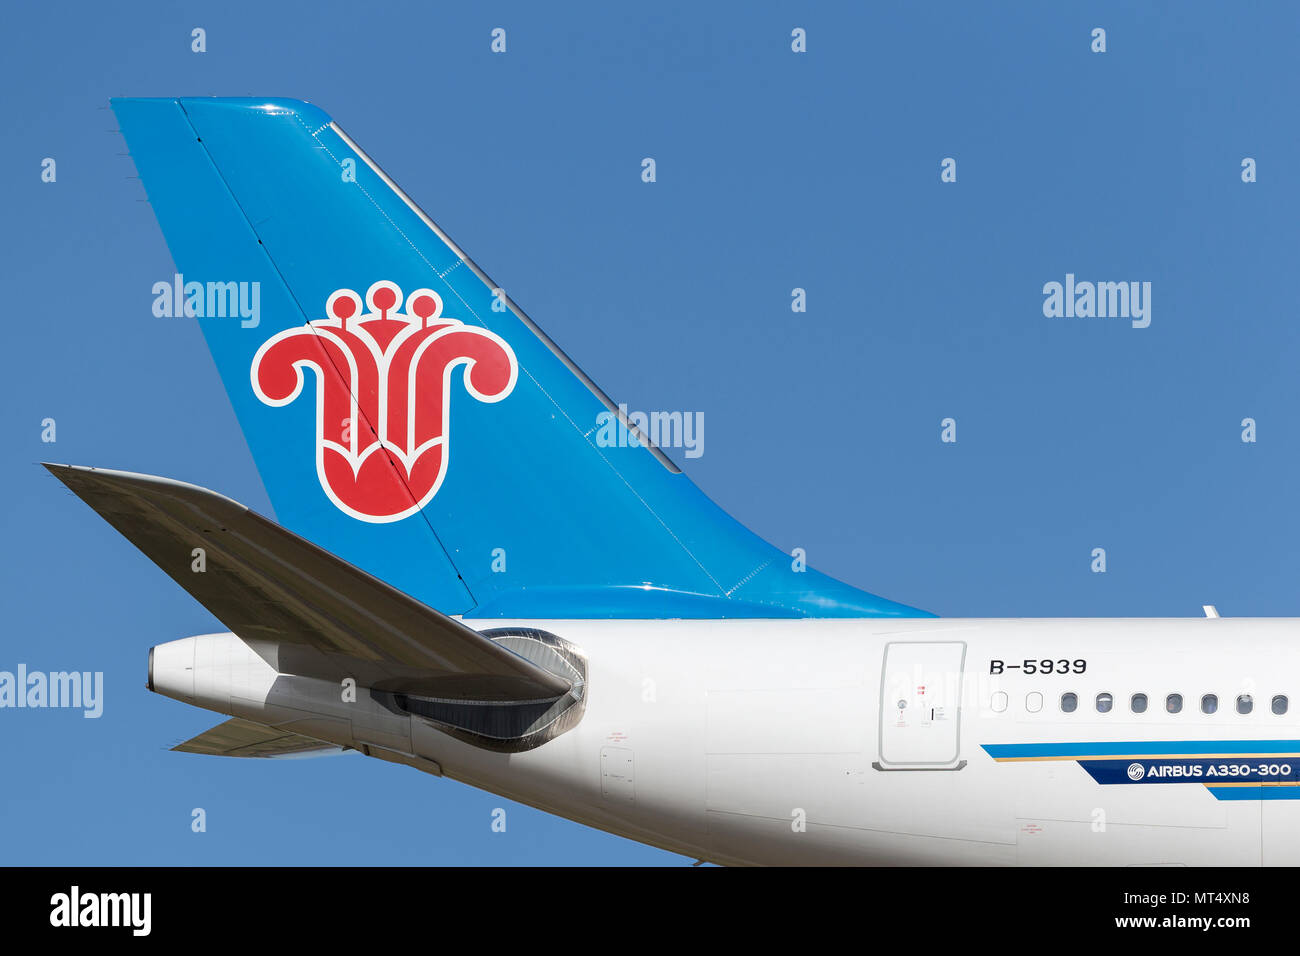 Melbourne, Australia - November 8, 2014: Tail of China Southern Airlines Airbus A330-323 B-5939 on approach to land at Melbourne International Airport Stock Photo